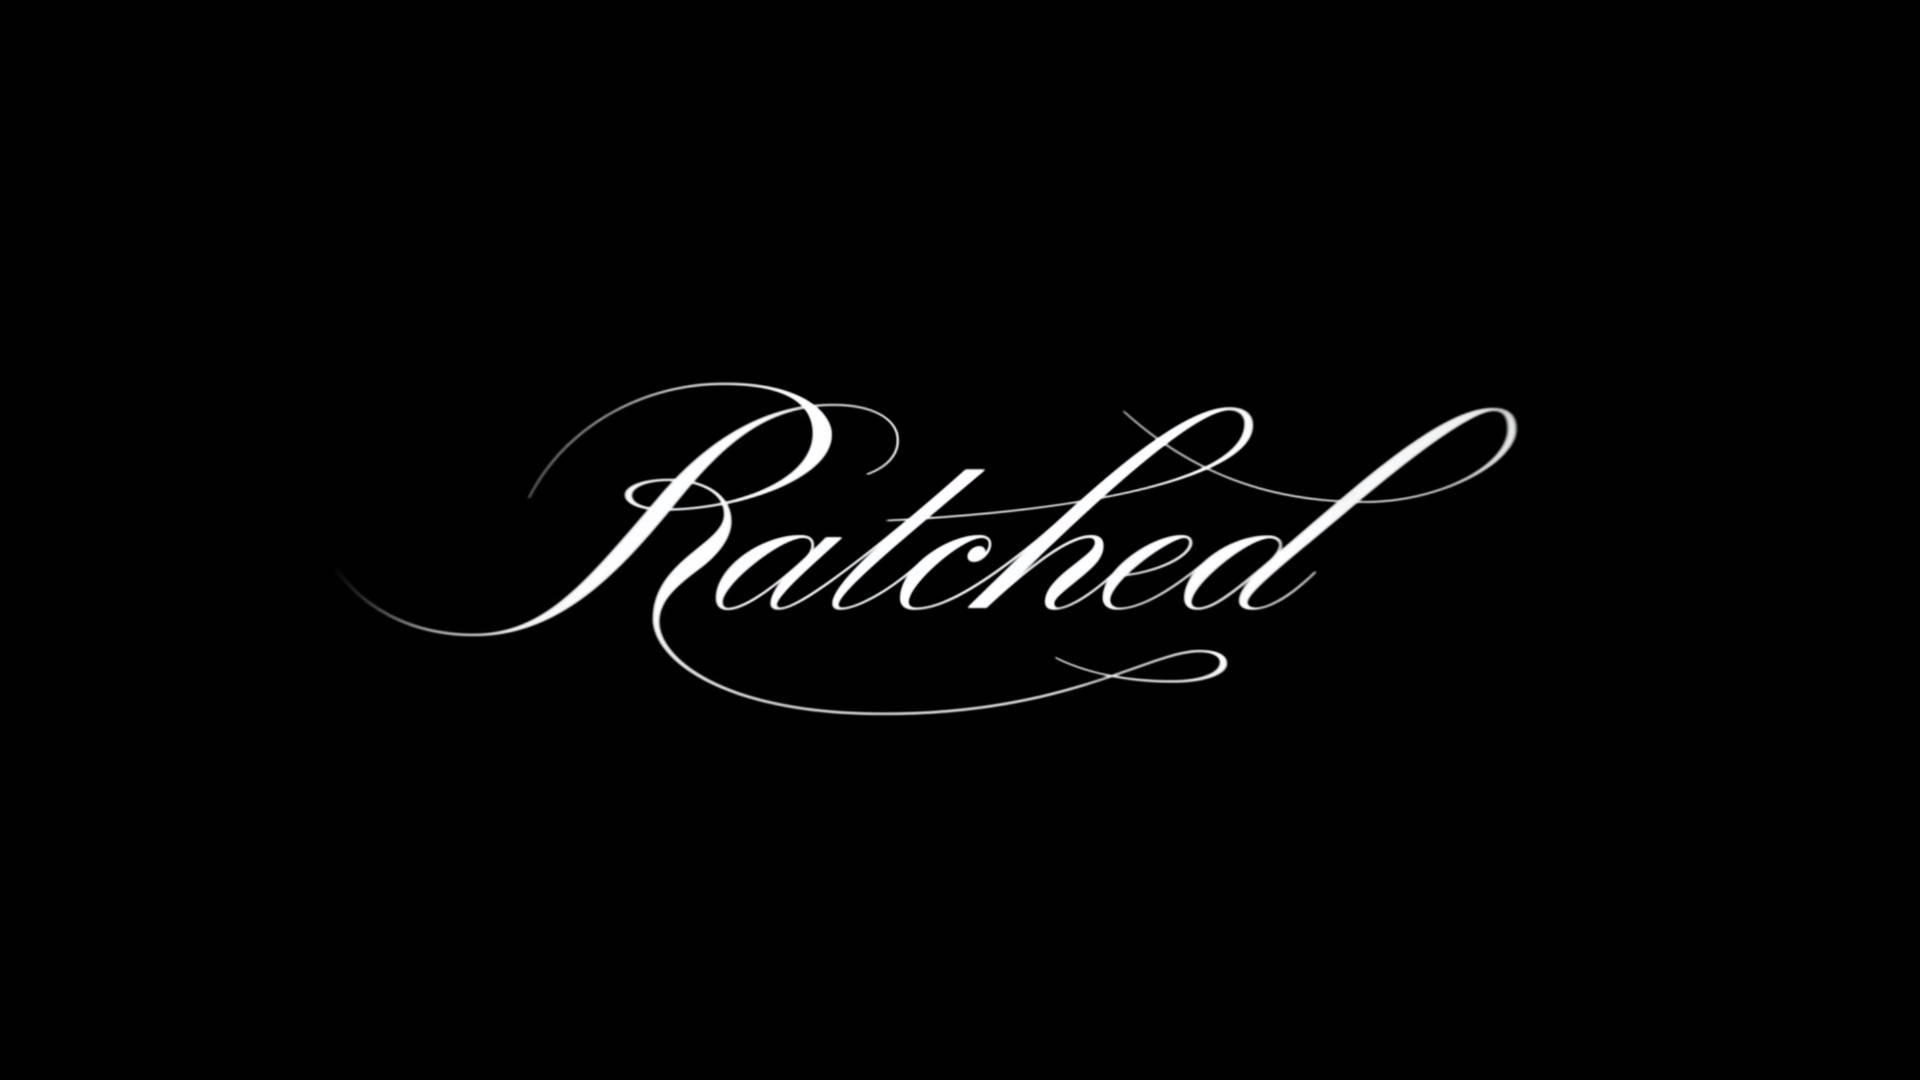 Ratched Series Logo Background